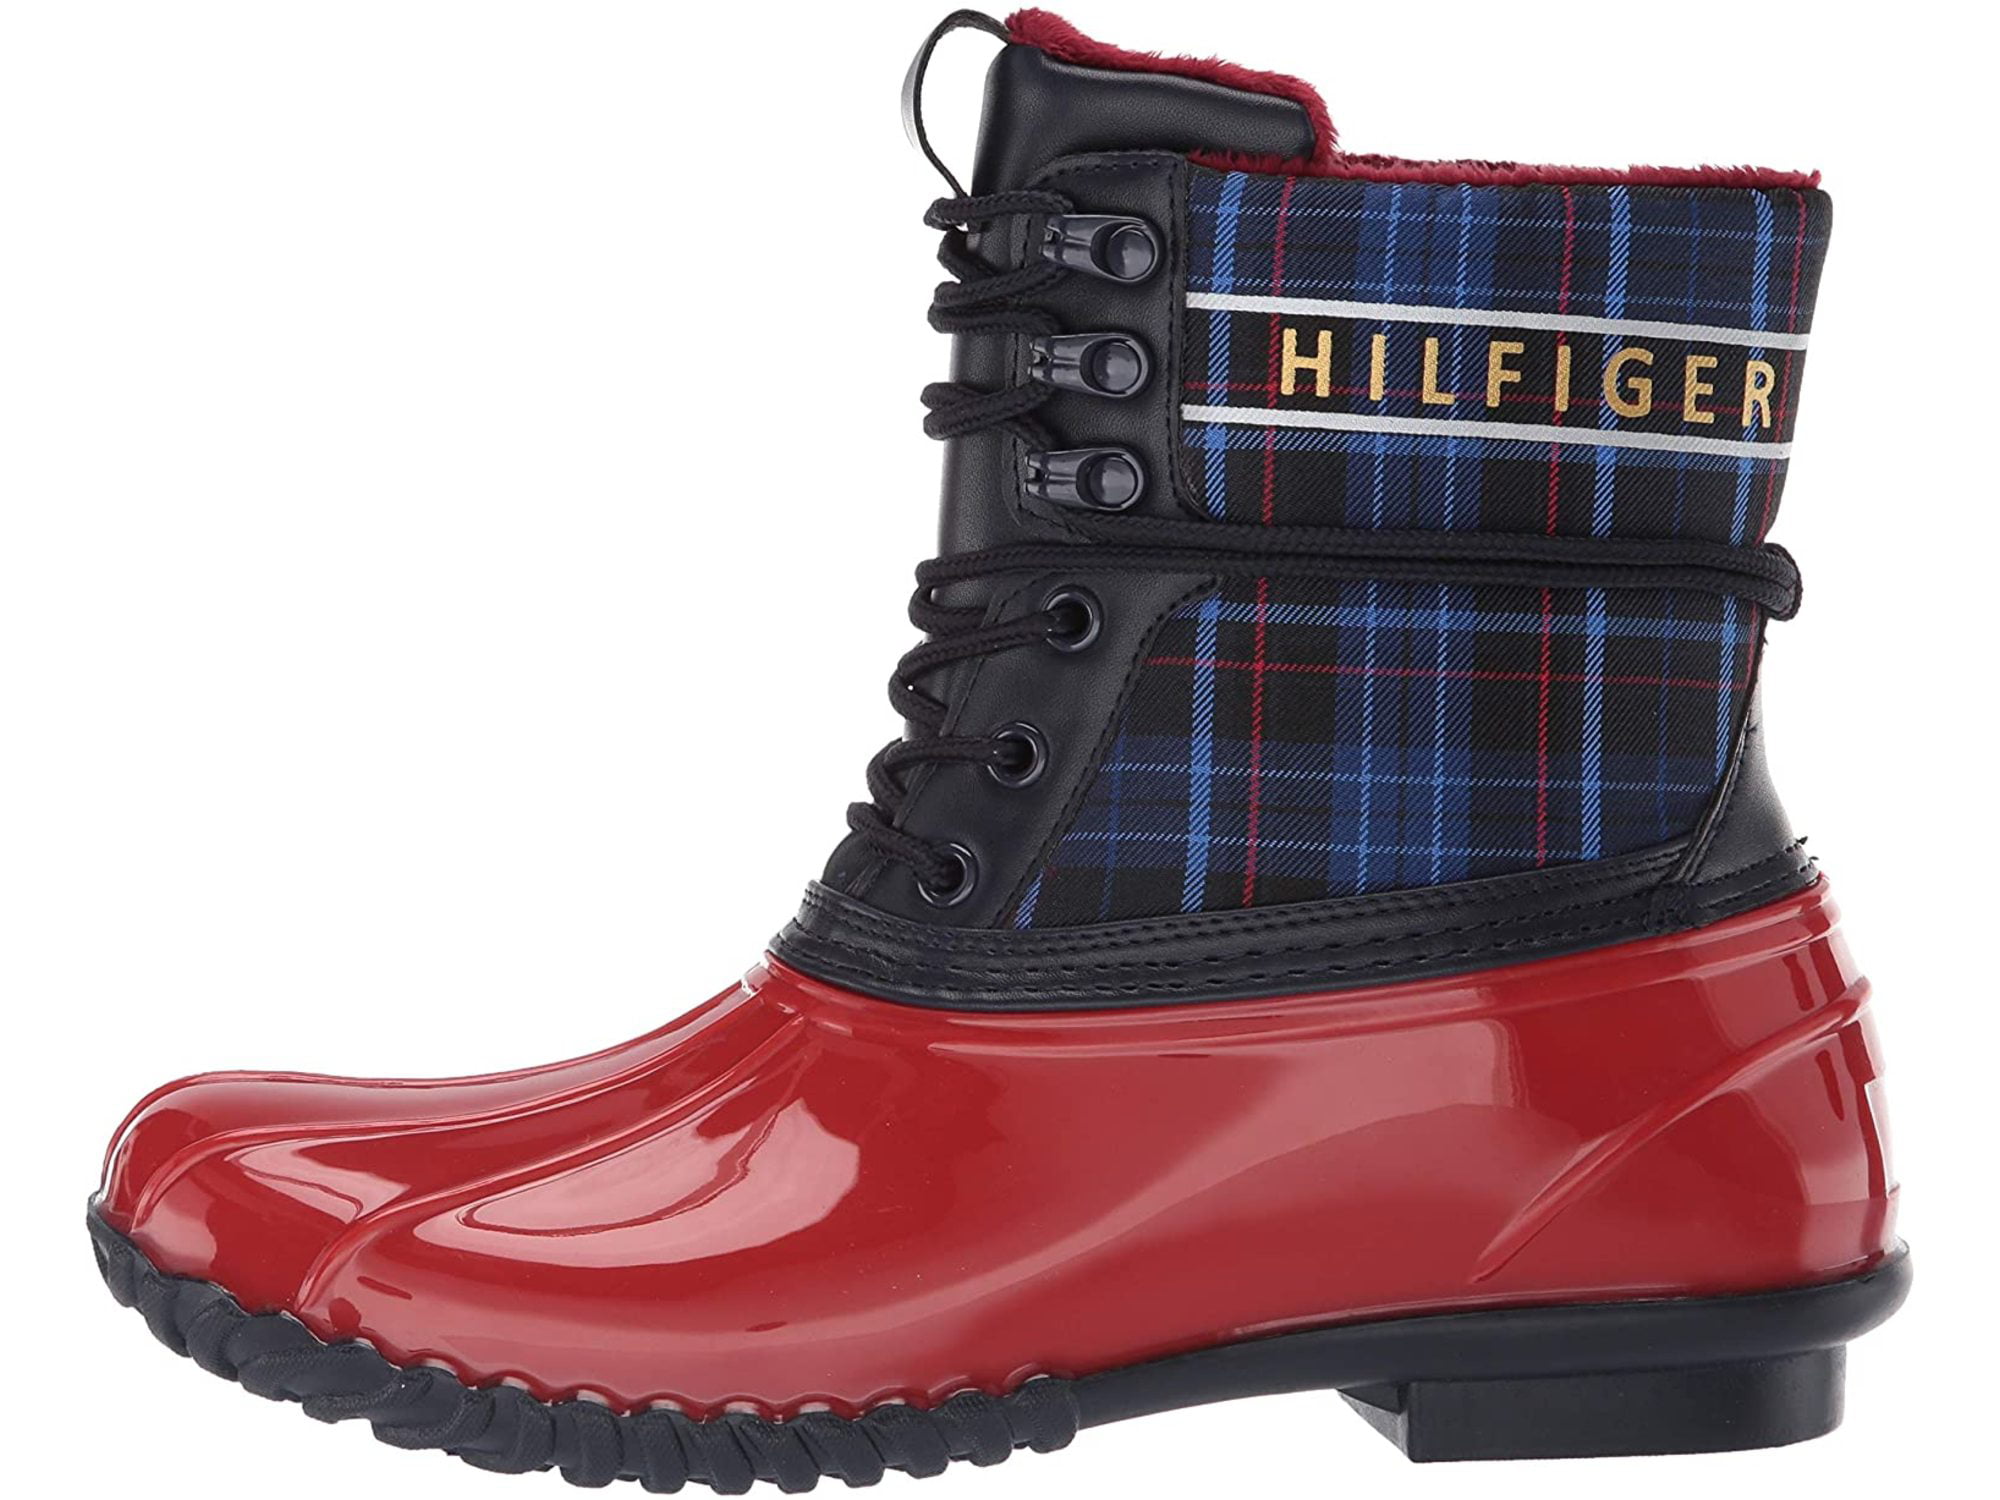 tommy hilfiger mid city boots